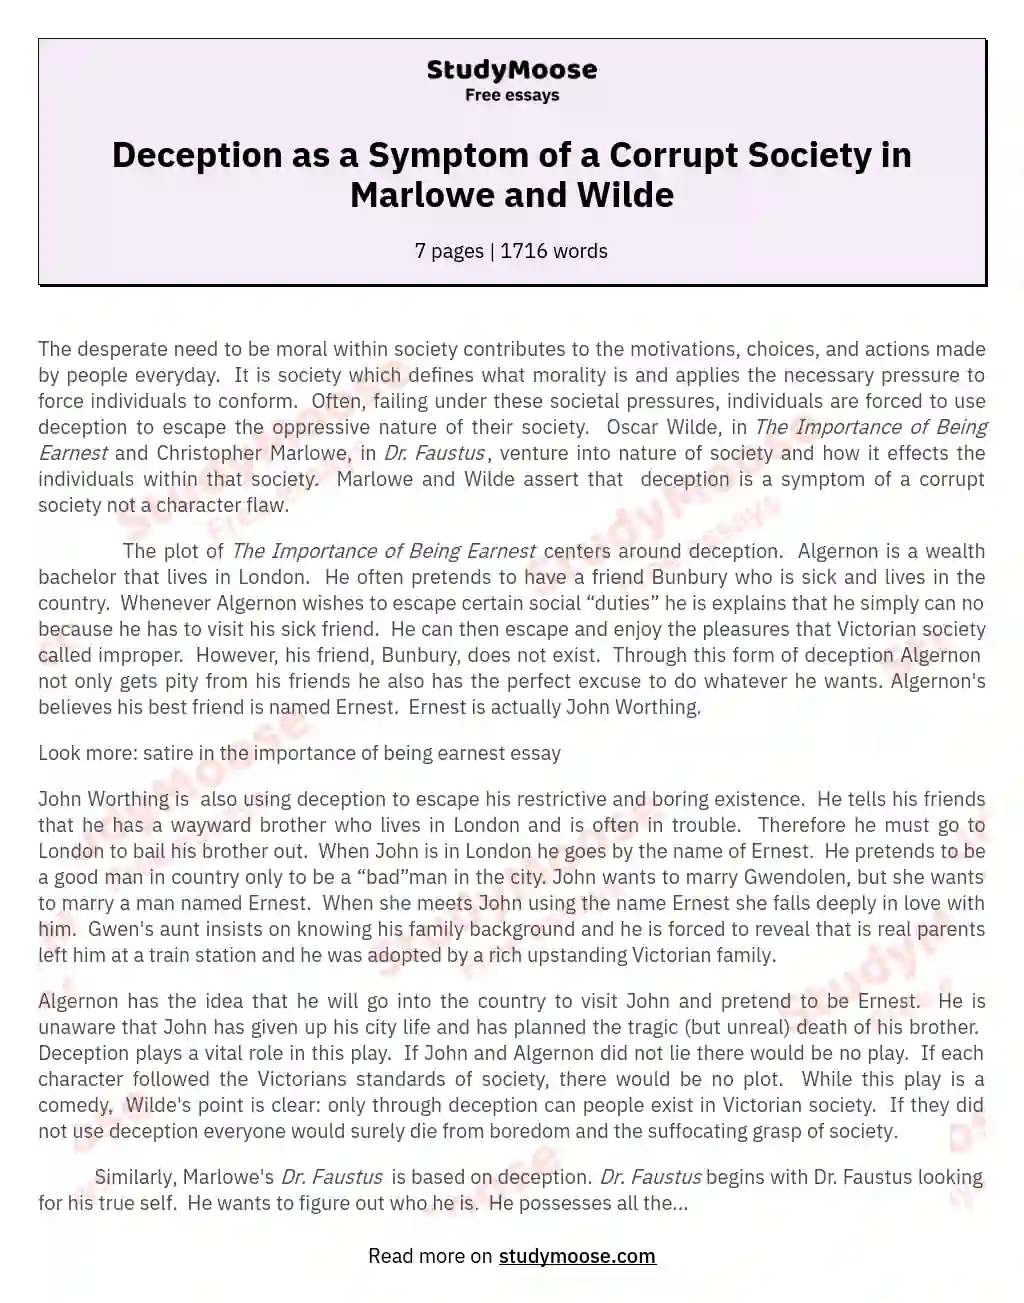 Deception as a Symptom of a Corrupt Society in Marlowe and Wilde